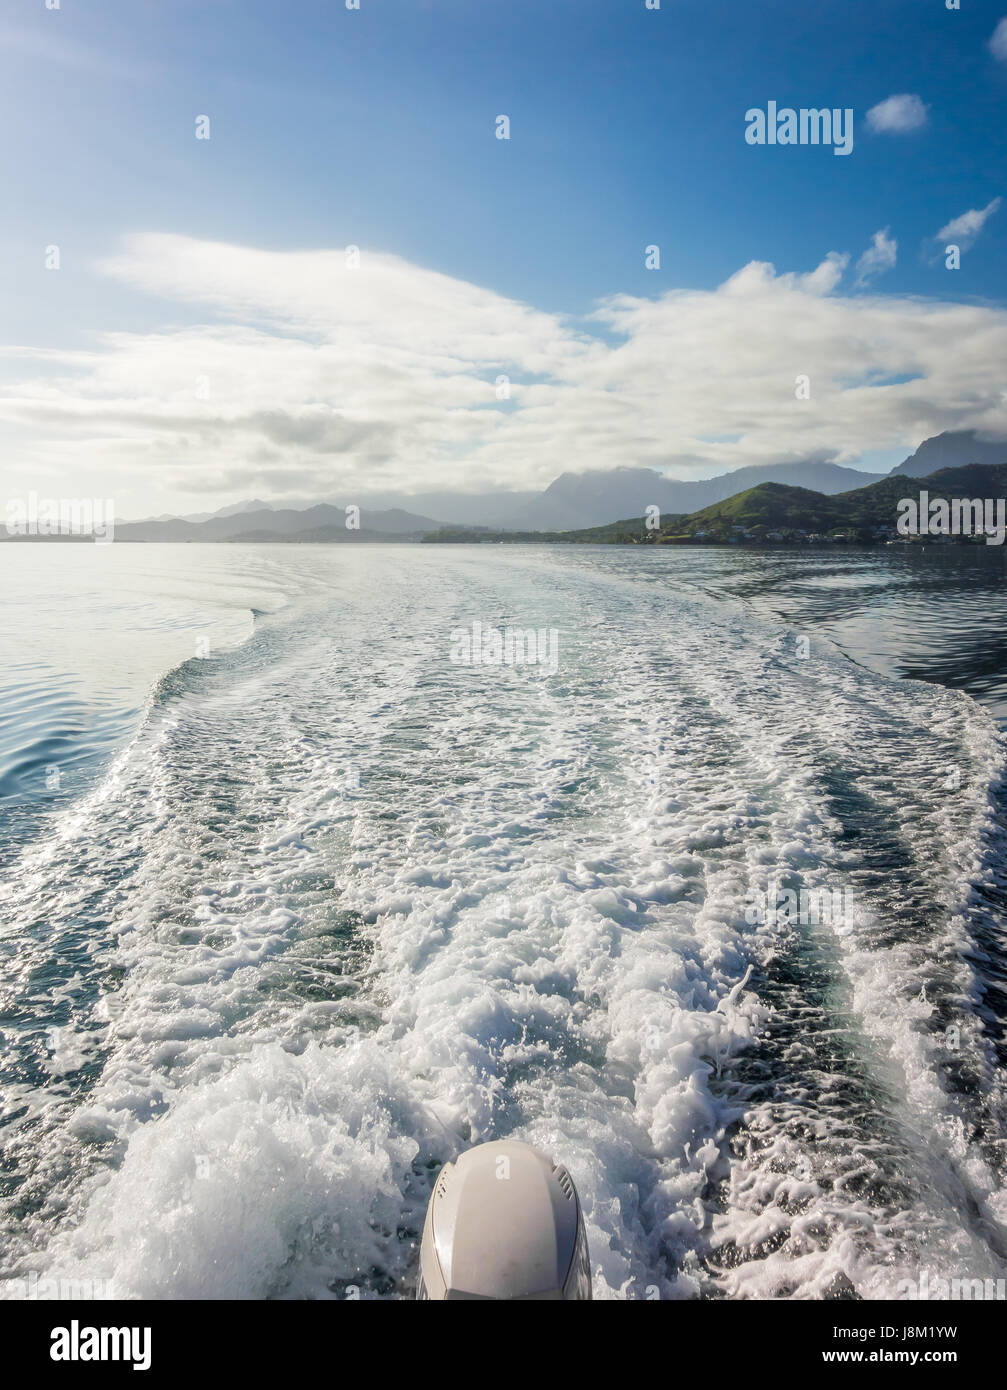 The waves and splashing water viewed from the back of a boat speeding across the blue water of Kaneohe Bay on Oahu, Hawaii. Stock Photo